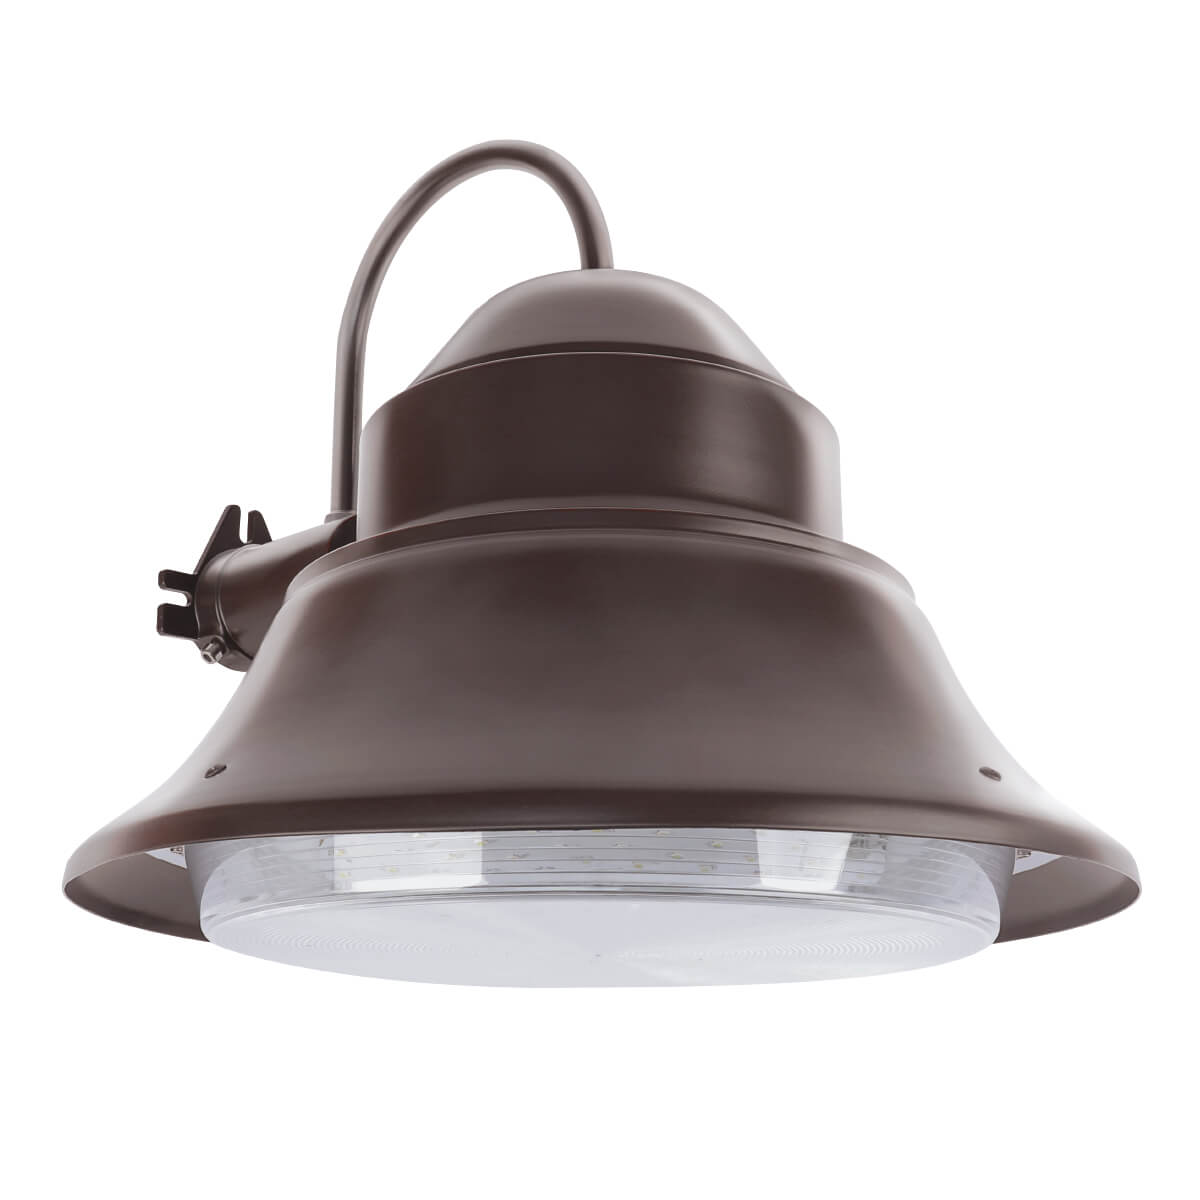 Feit Electric 73700 Dusk to Dawn LED Security Light Fixture, Bronze, 13", 50W